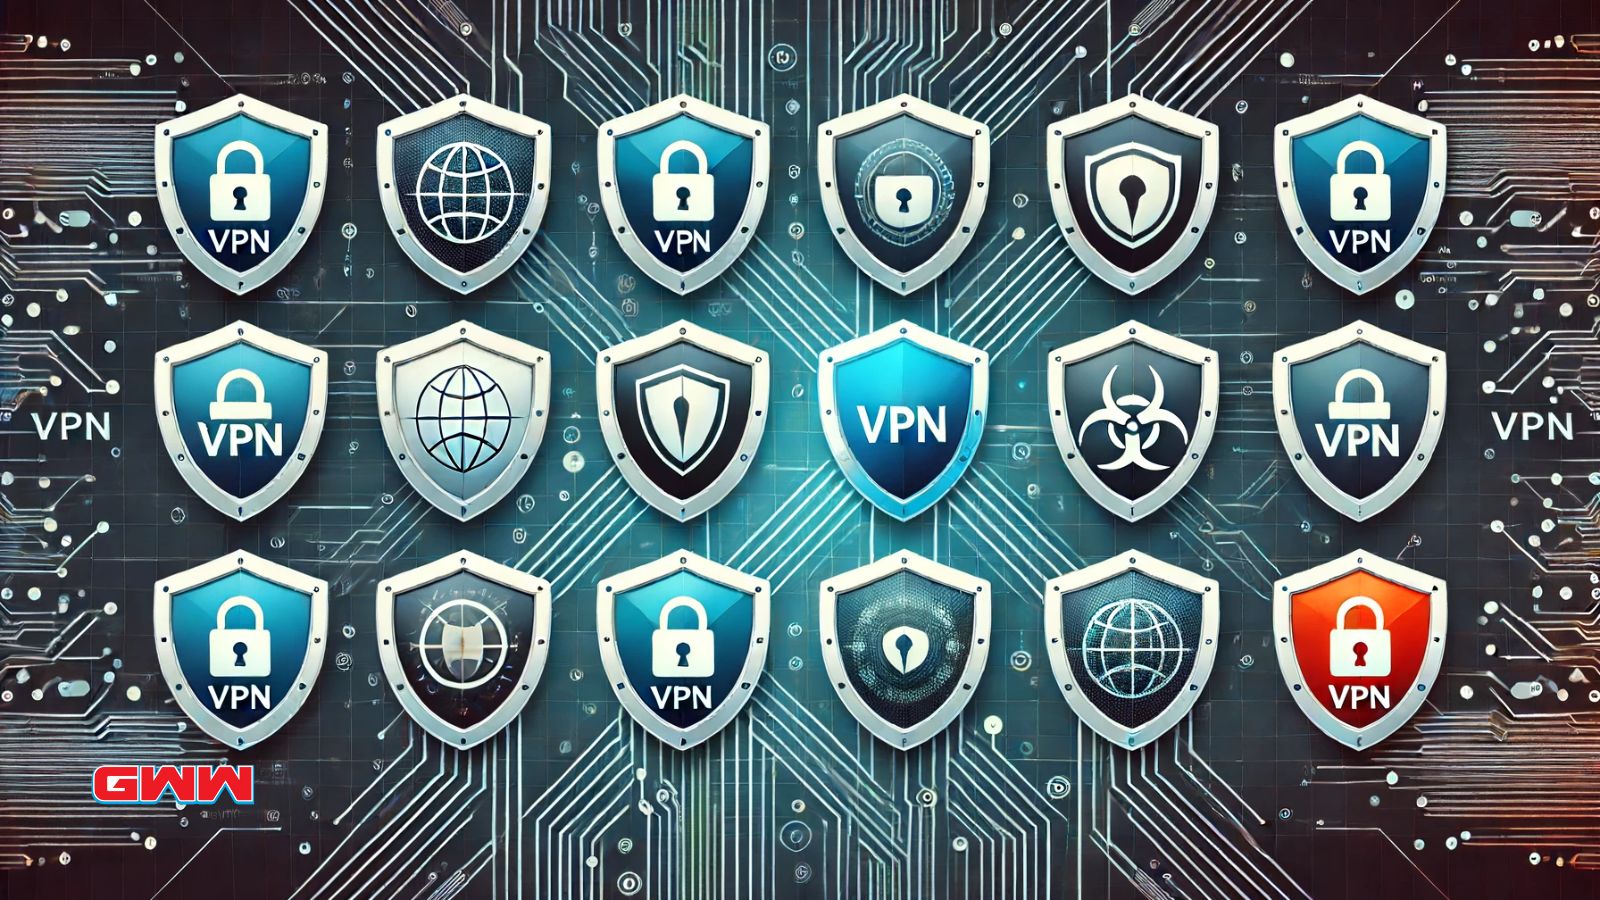 Top 10 VPNs represented by shields with unique symbols